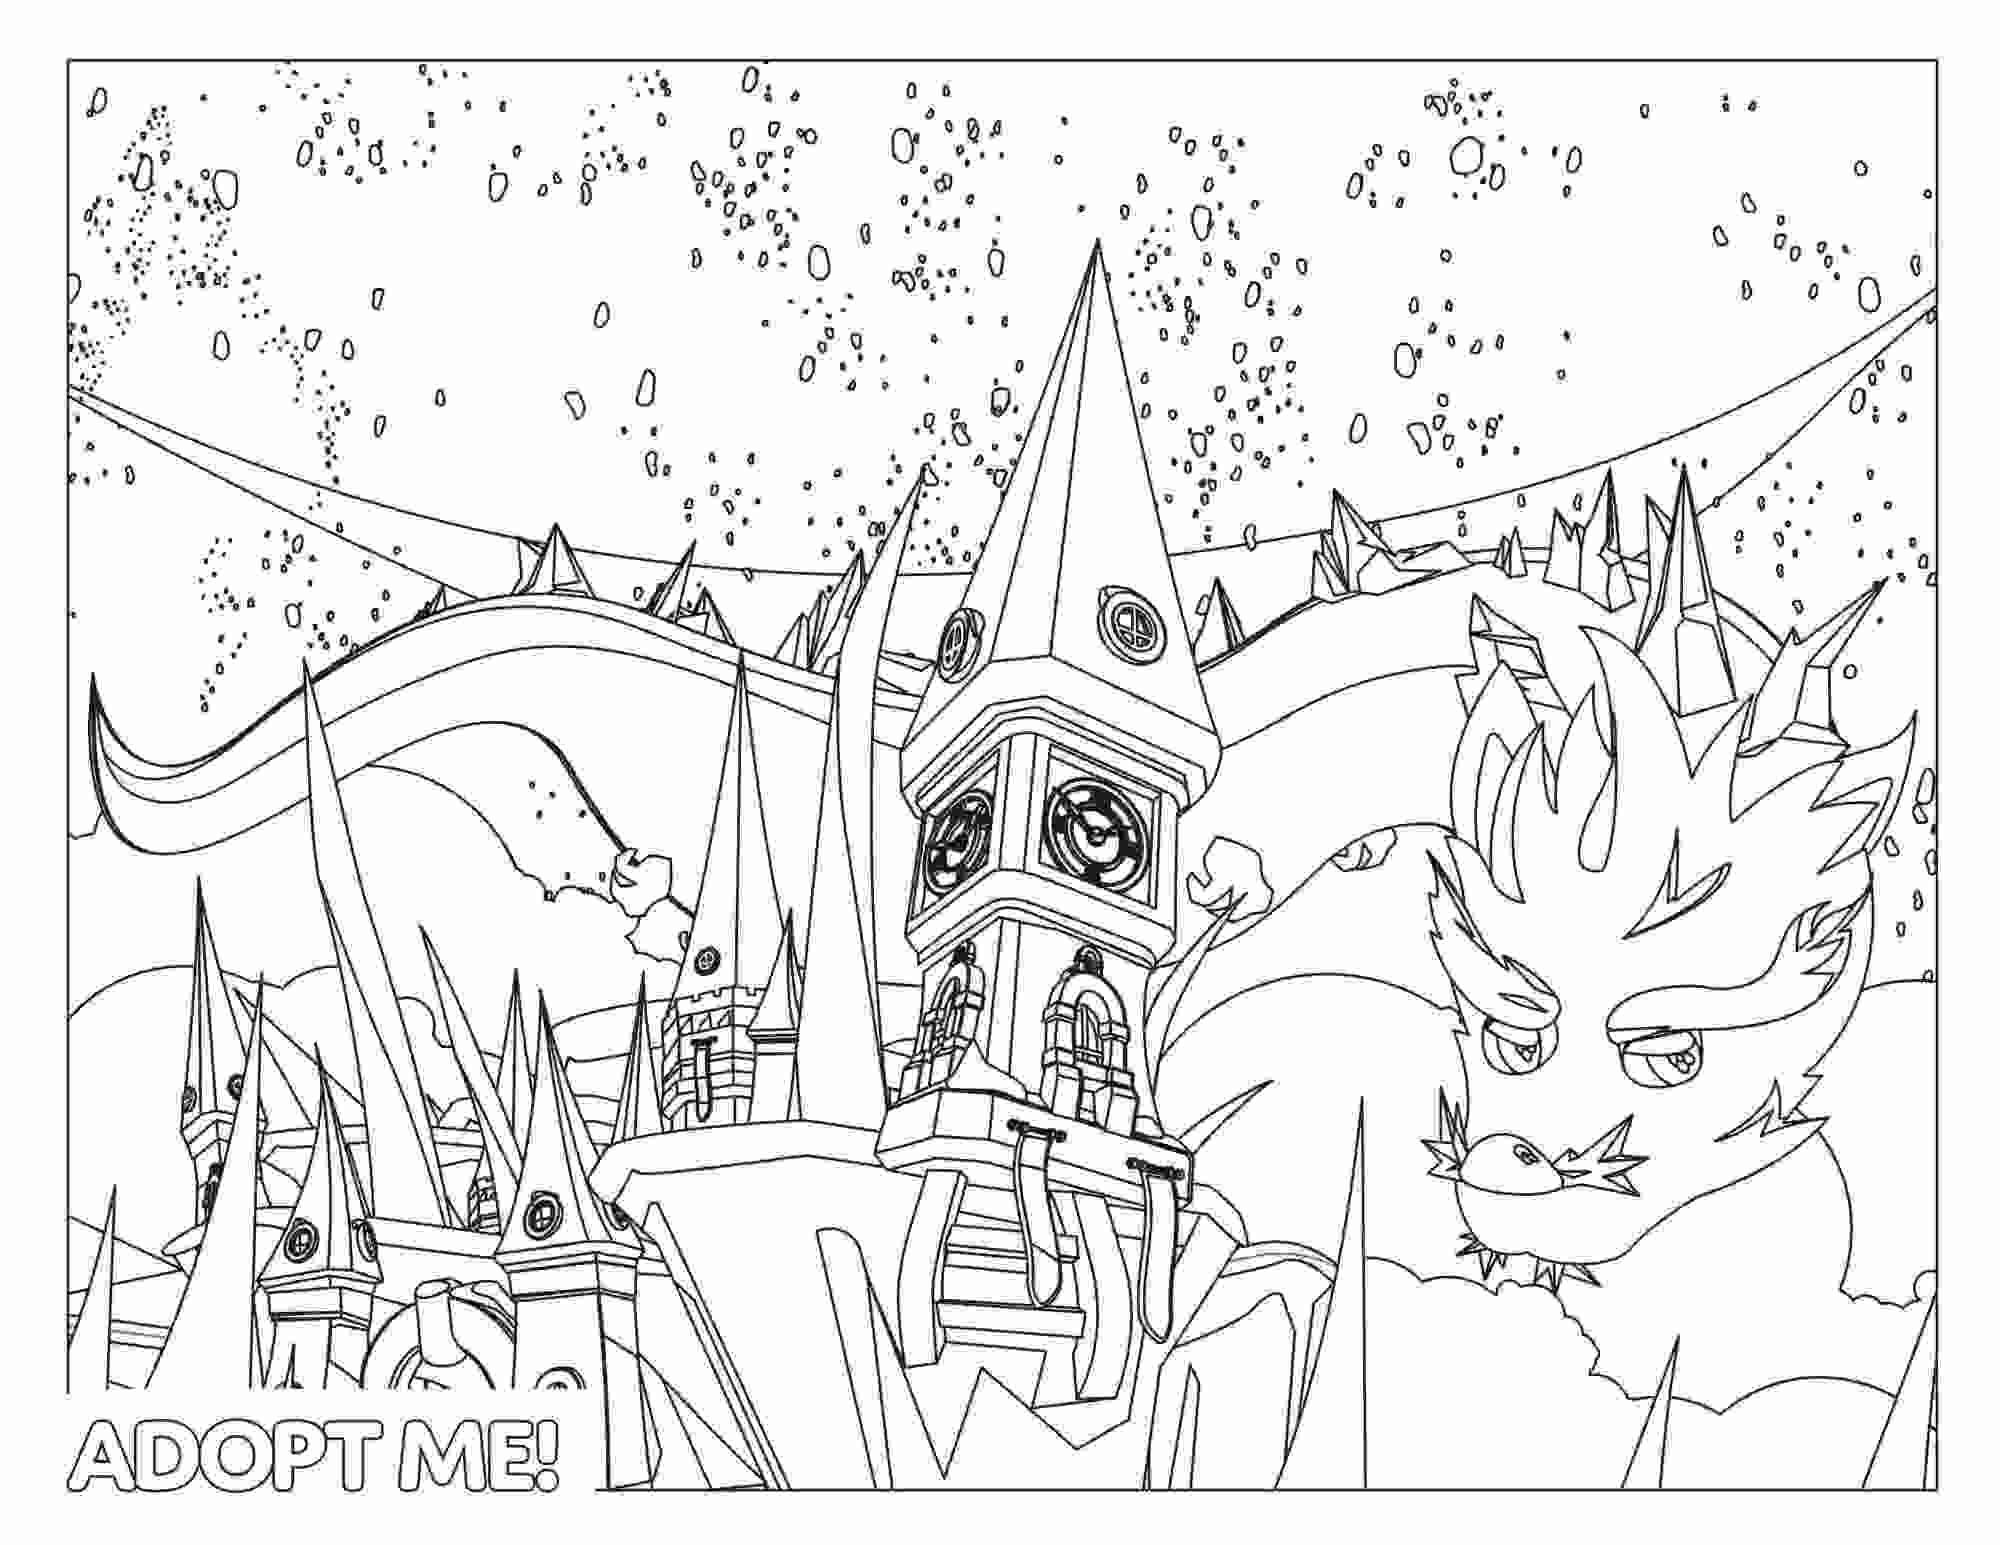 Winter holiday from Adopt me Coloring Page